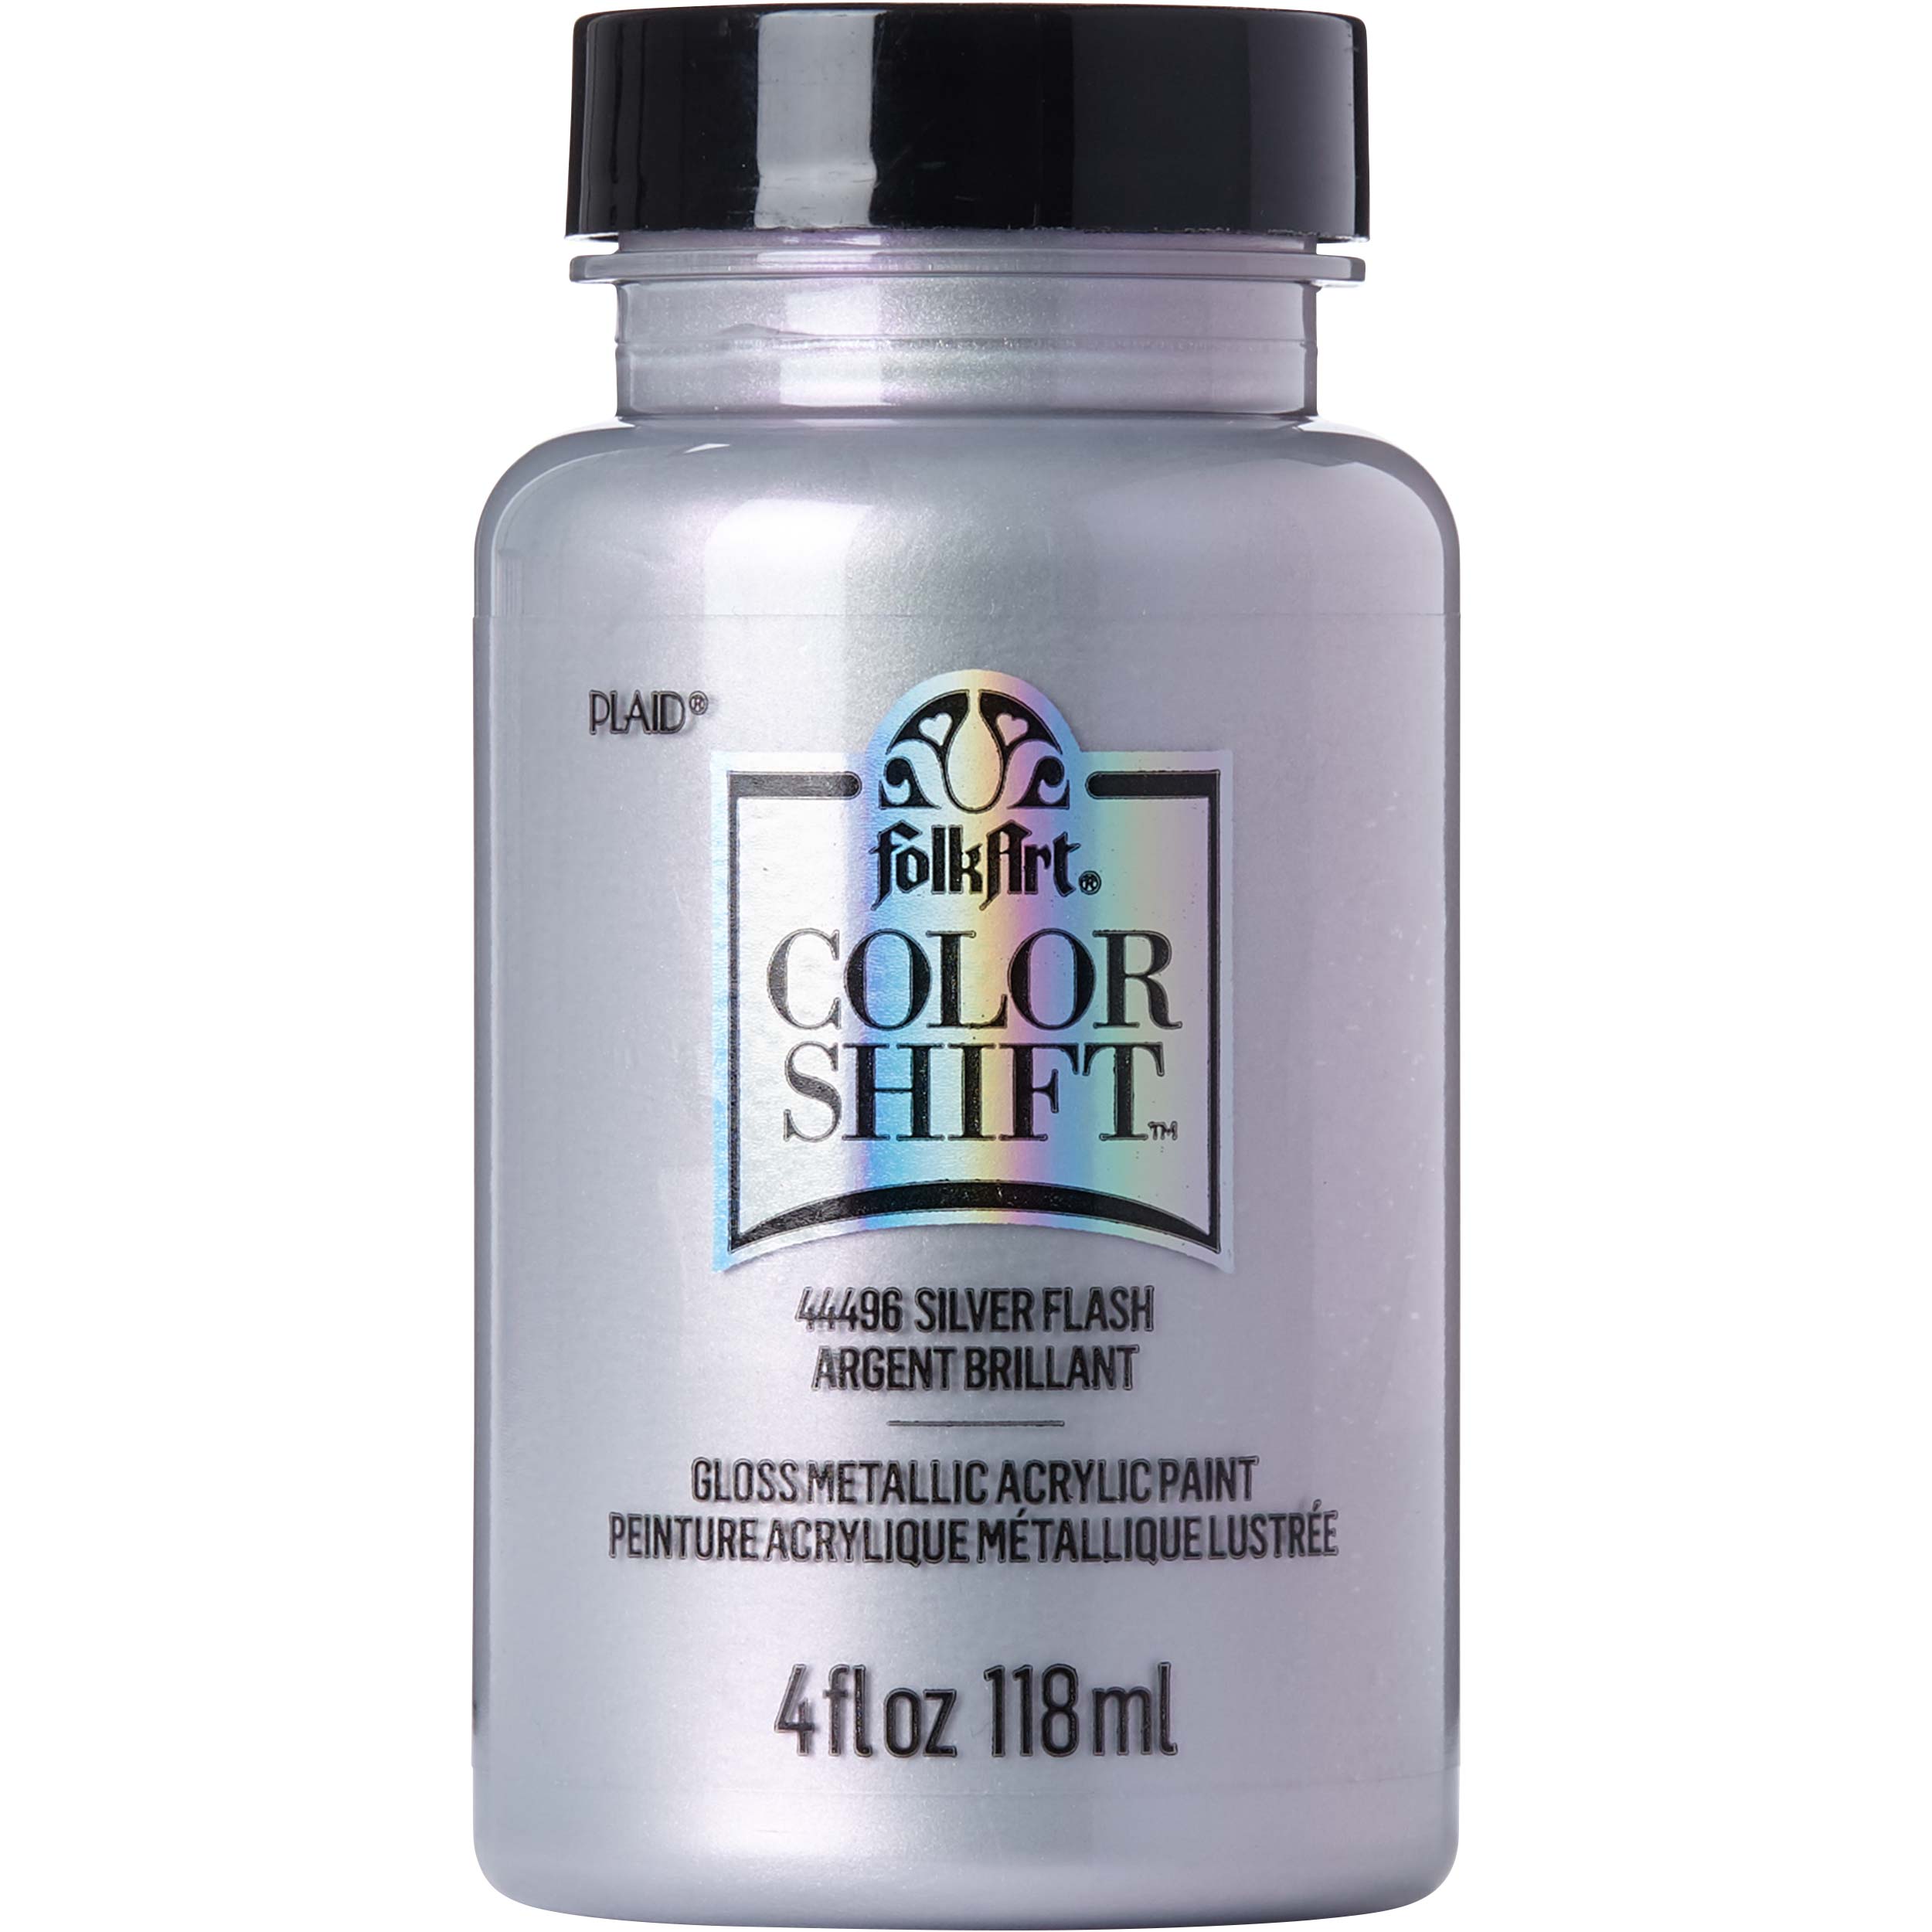 Shimmering Silver Metallic Acrylic Paint, Stencil Supplies